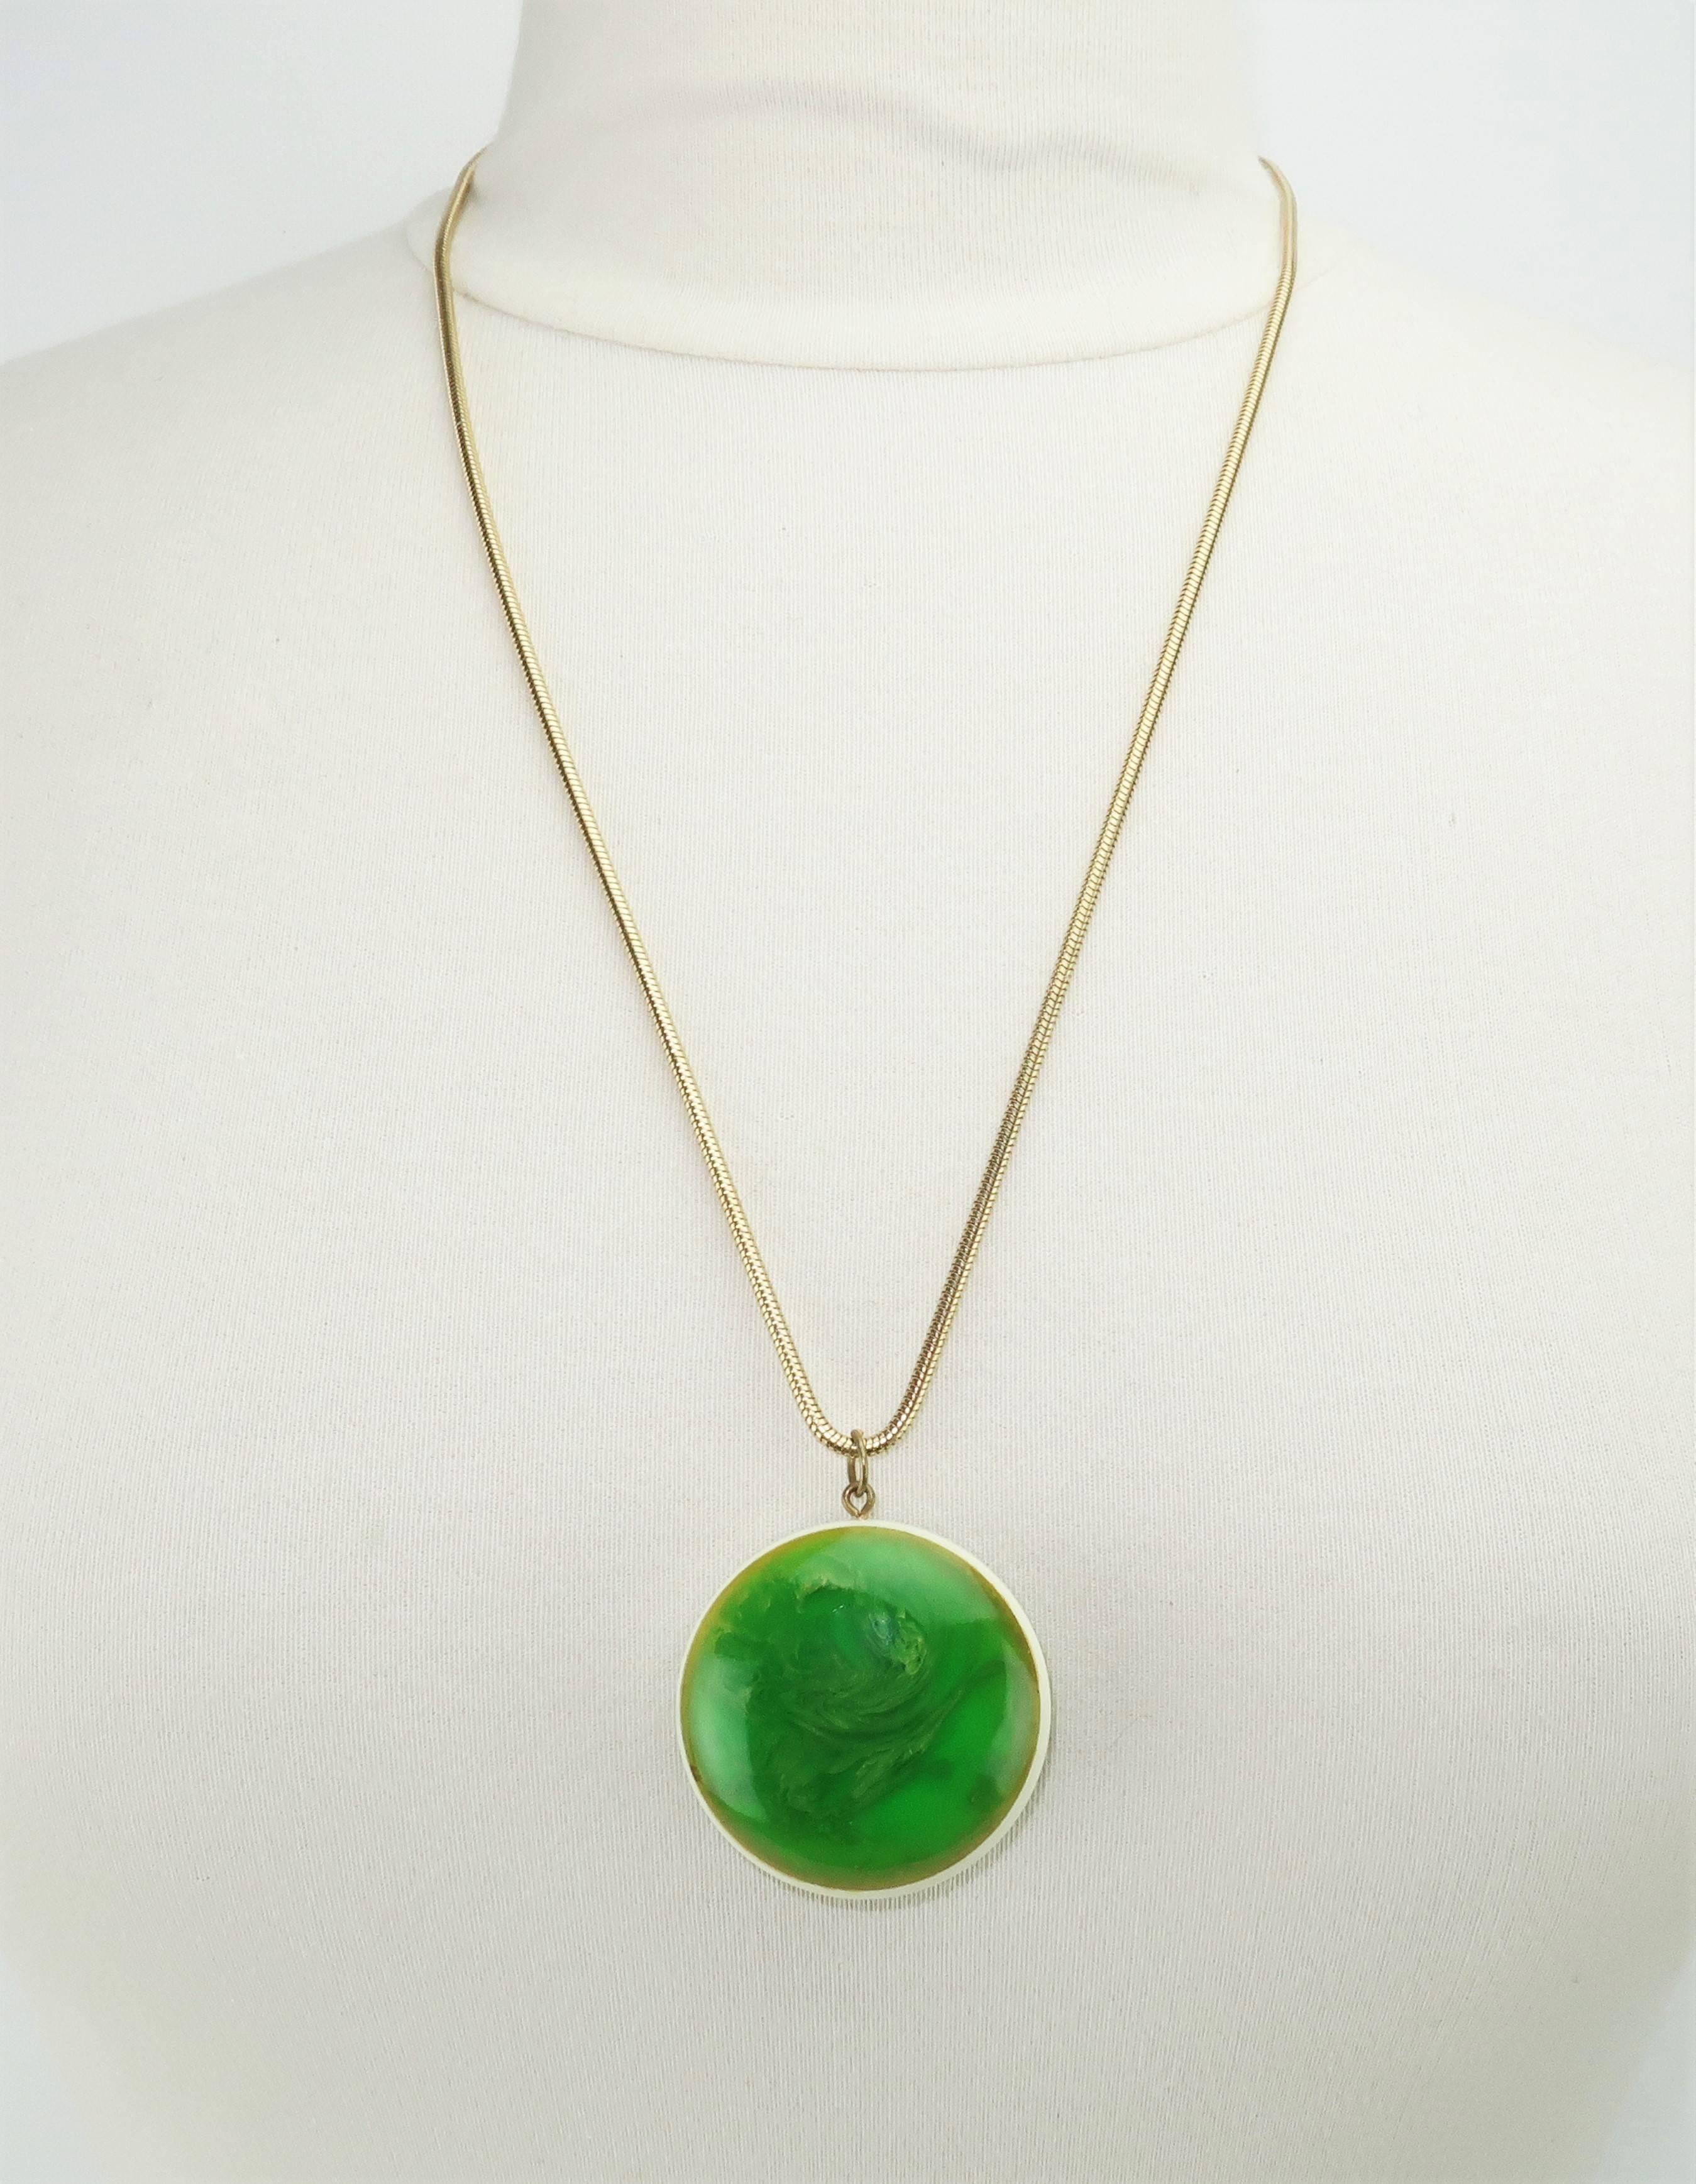 This mod acrylic pendant is a delightful miniature world of emerald green swirls providing a marbleized effect similar to end-of-day bakelite jewelry.  The double sided acrylic is encased by an ivory white edging which sets off the deep colors.  The